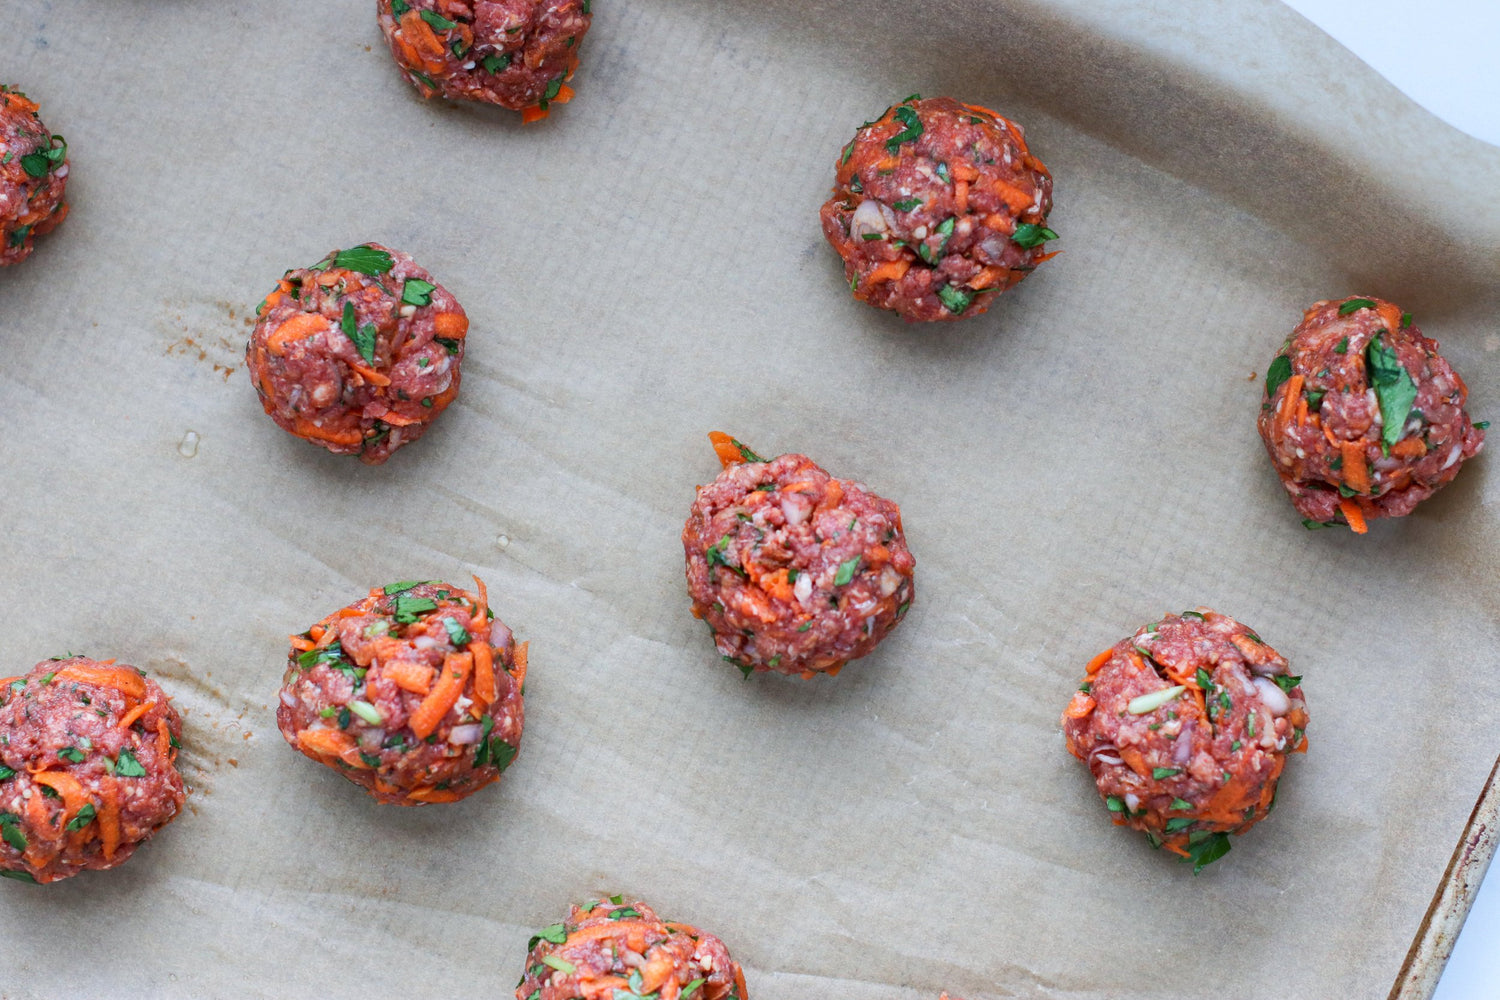 Tapas-Style Bison Meatballs with Smoked Paprika and Carrots